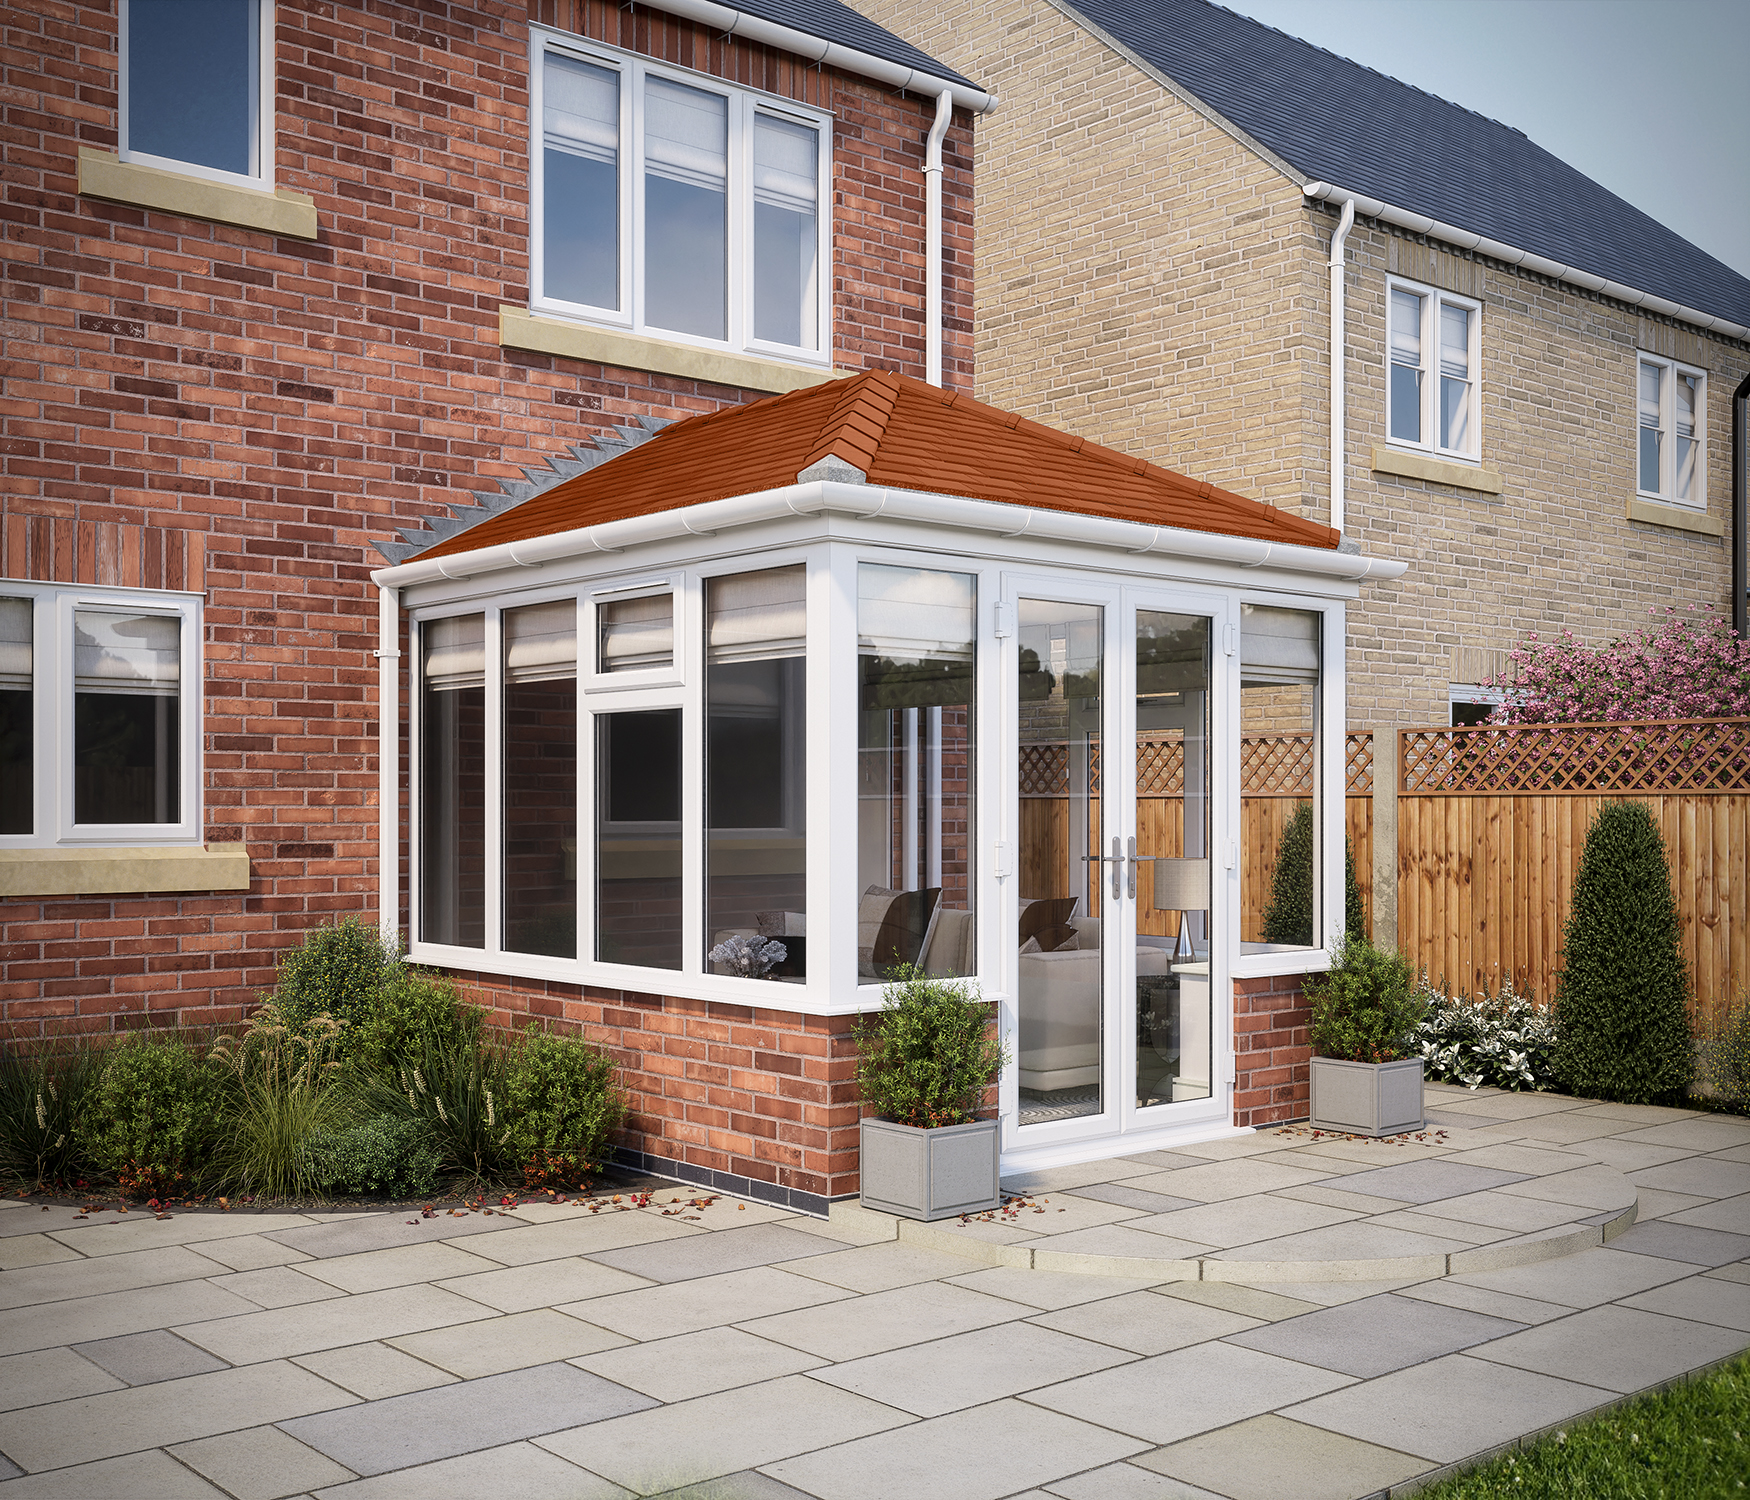 Image of SOLid Roof Edwardian Conservatory White Frames Dwarf Wall with Rustic Terracotta Tiles - 13 x 10ft